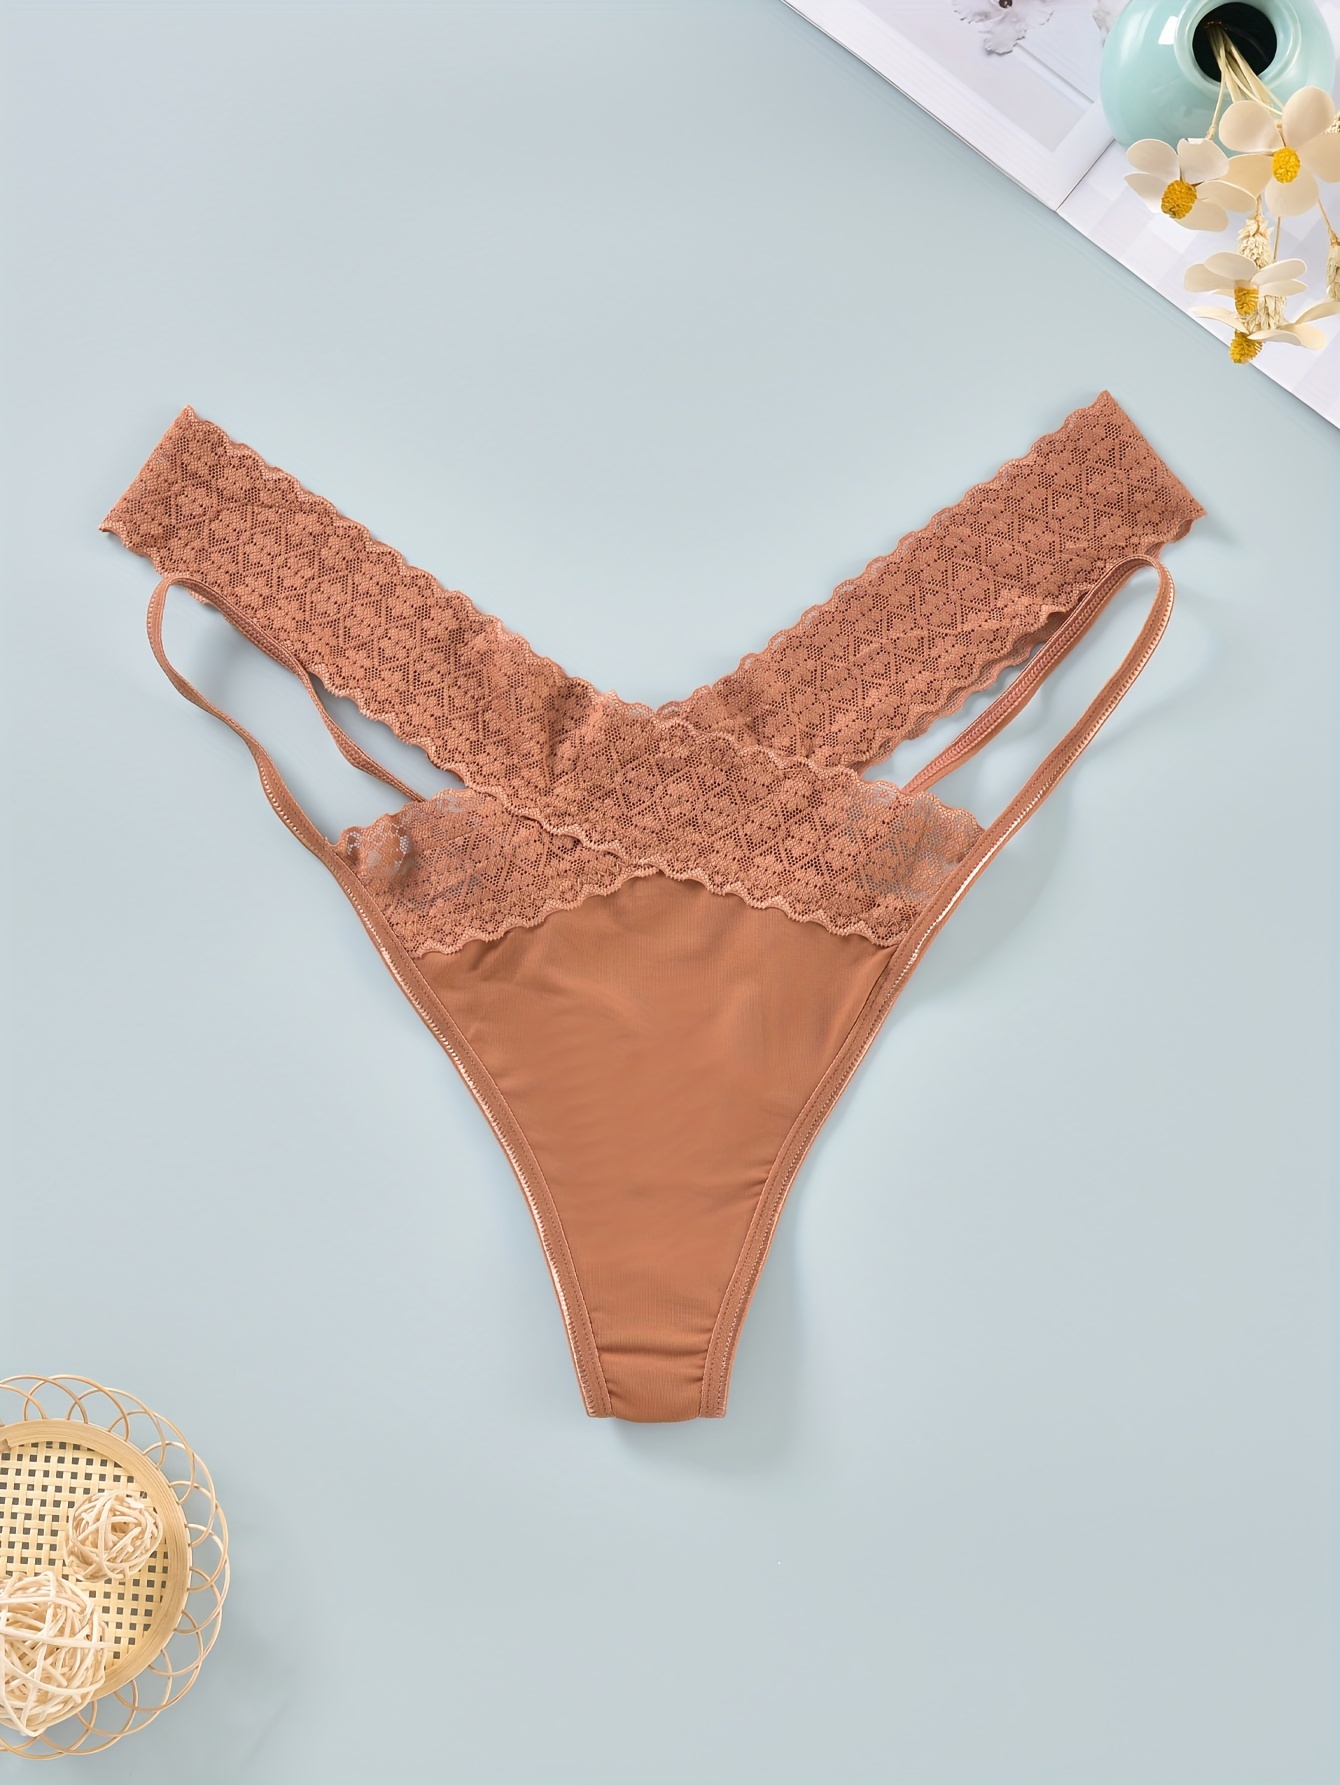 High-Waist G-String with Cut-Out Laces 